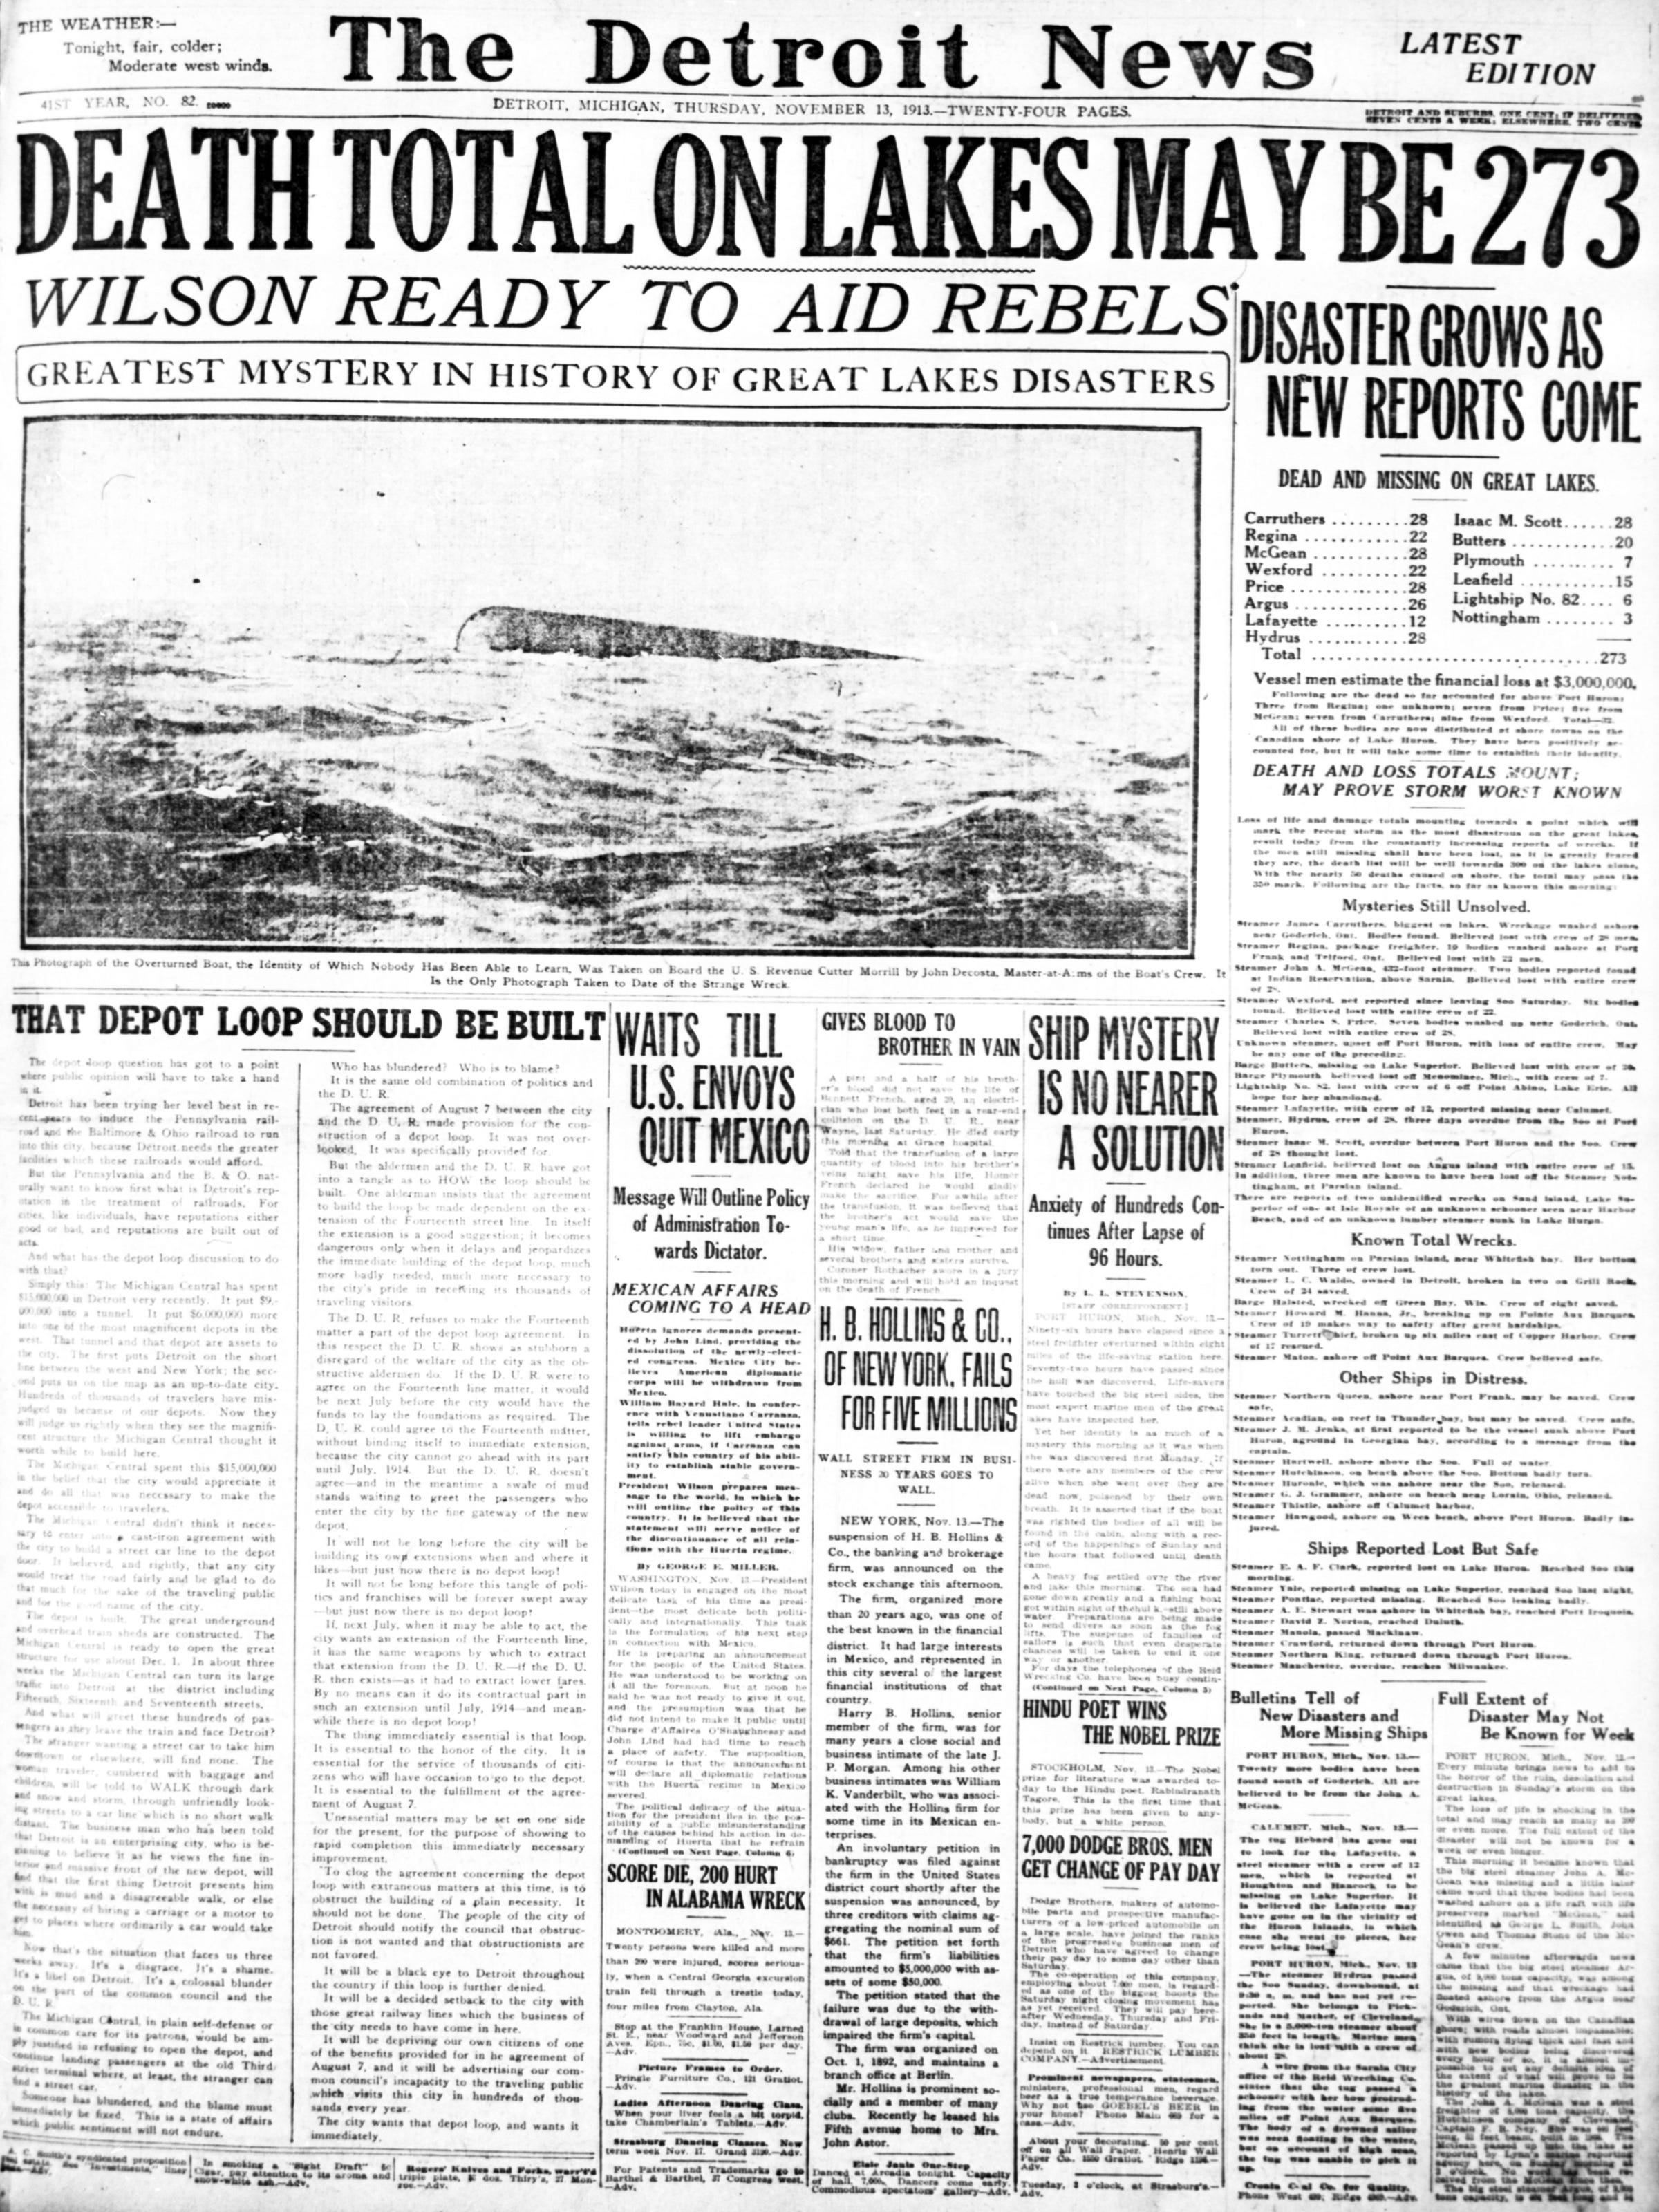 The front page of The Detroit News on Nov. 13, 1913, featured the only photo taken at that time of a ship wrecked by the Great Lakes storm. The vessel was later identified as the ore carrier Charles S. Price.